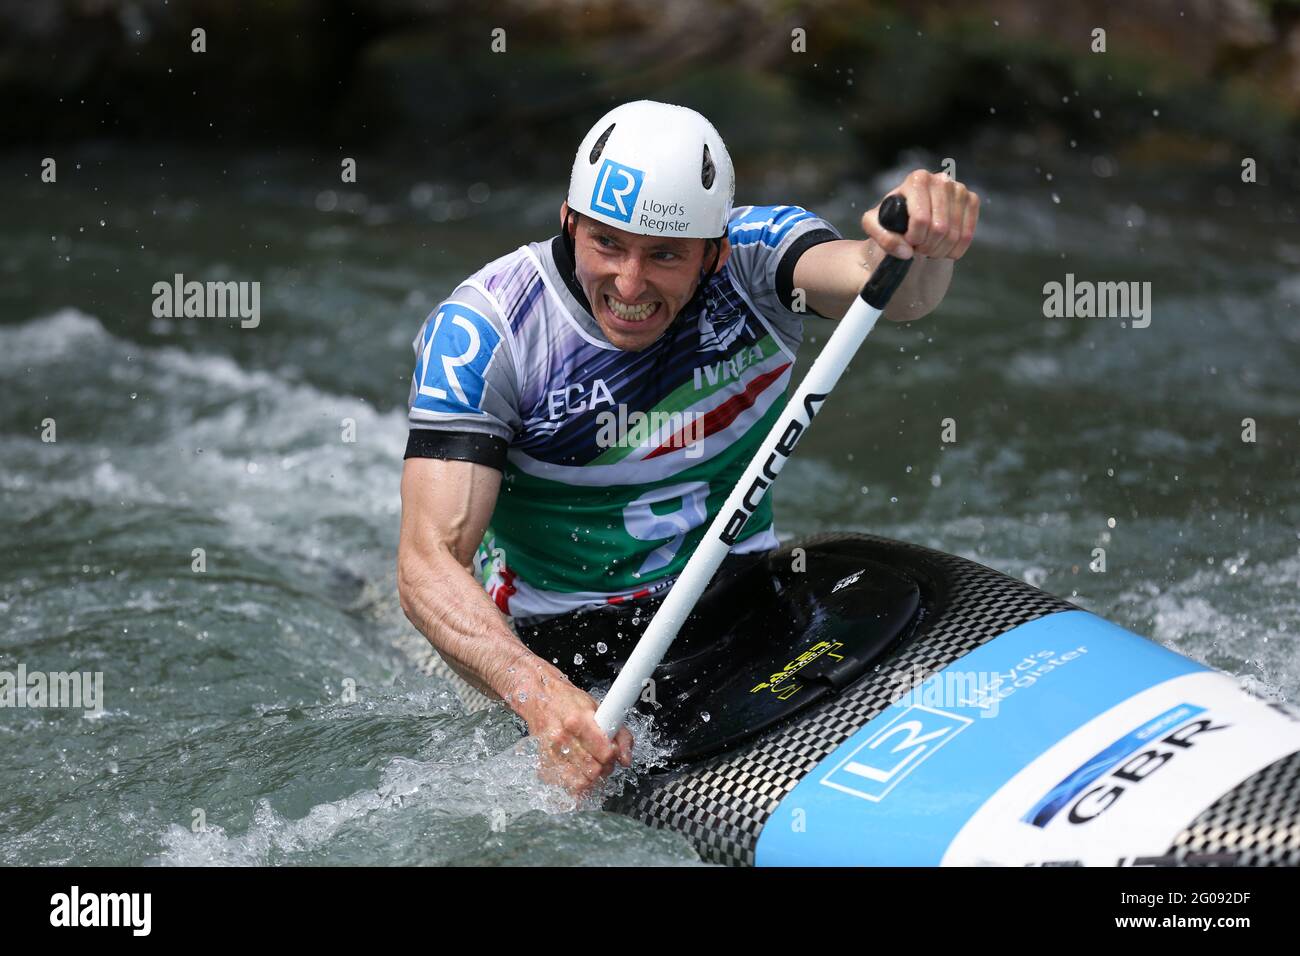 David FLORENCE of Great Britain competes in the Men's Canoe (C1) semifinals  during the ECA Canoe Slalom European Championships on the Dora Baltea rive  Stock Photo - Alamy